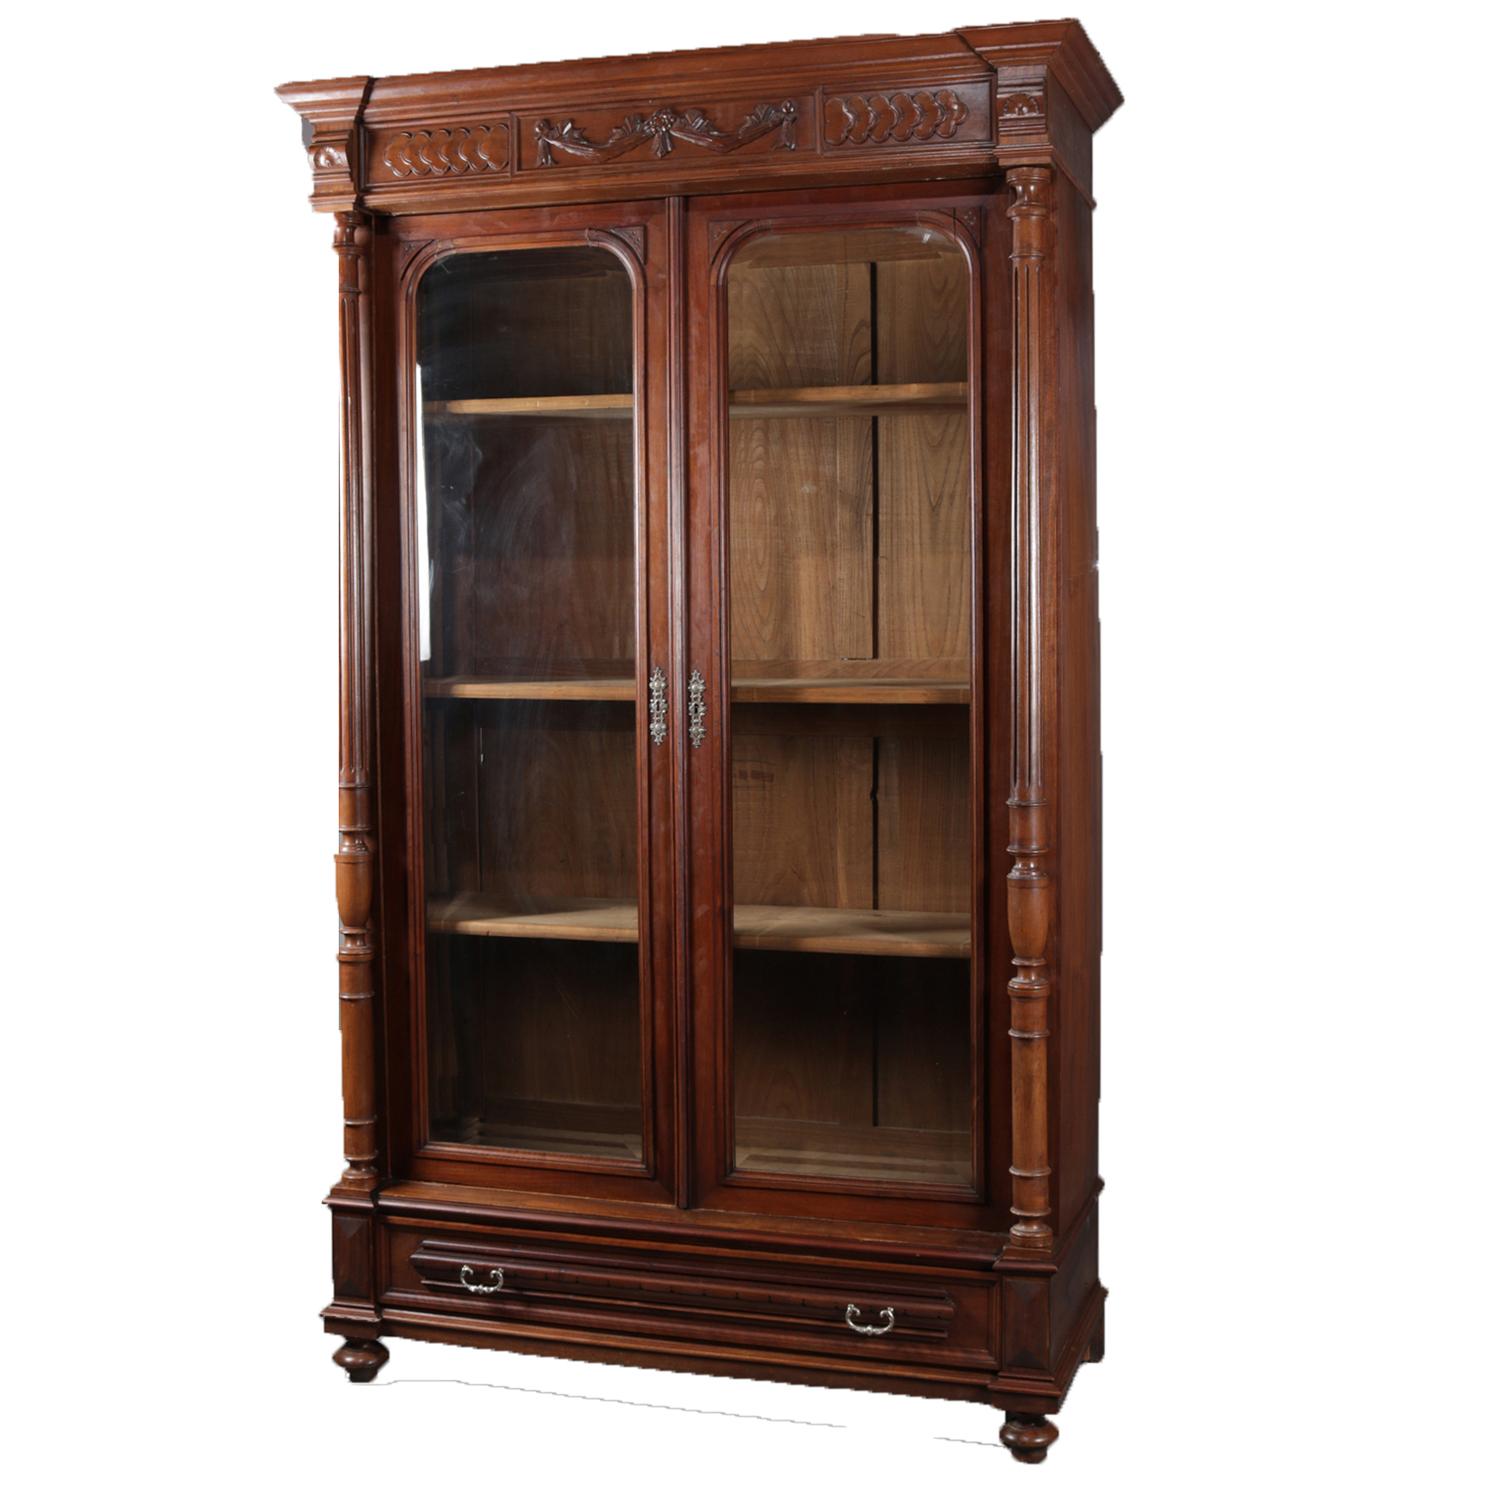 Antique French Carved Walnut Double Door Enclosed Bookcase, circa 1890